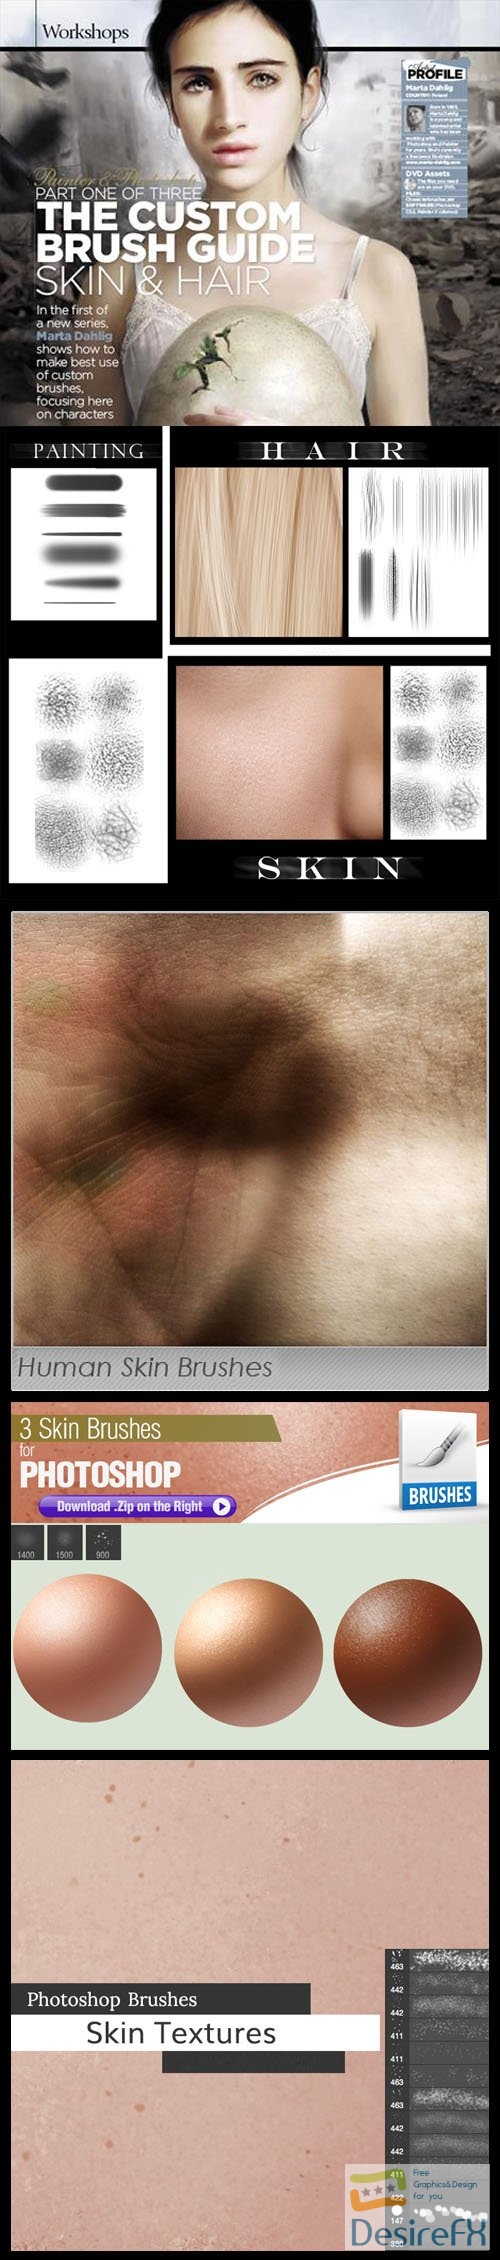 Realistic Human Skin & Hair Brushes Collection for Photoshop